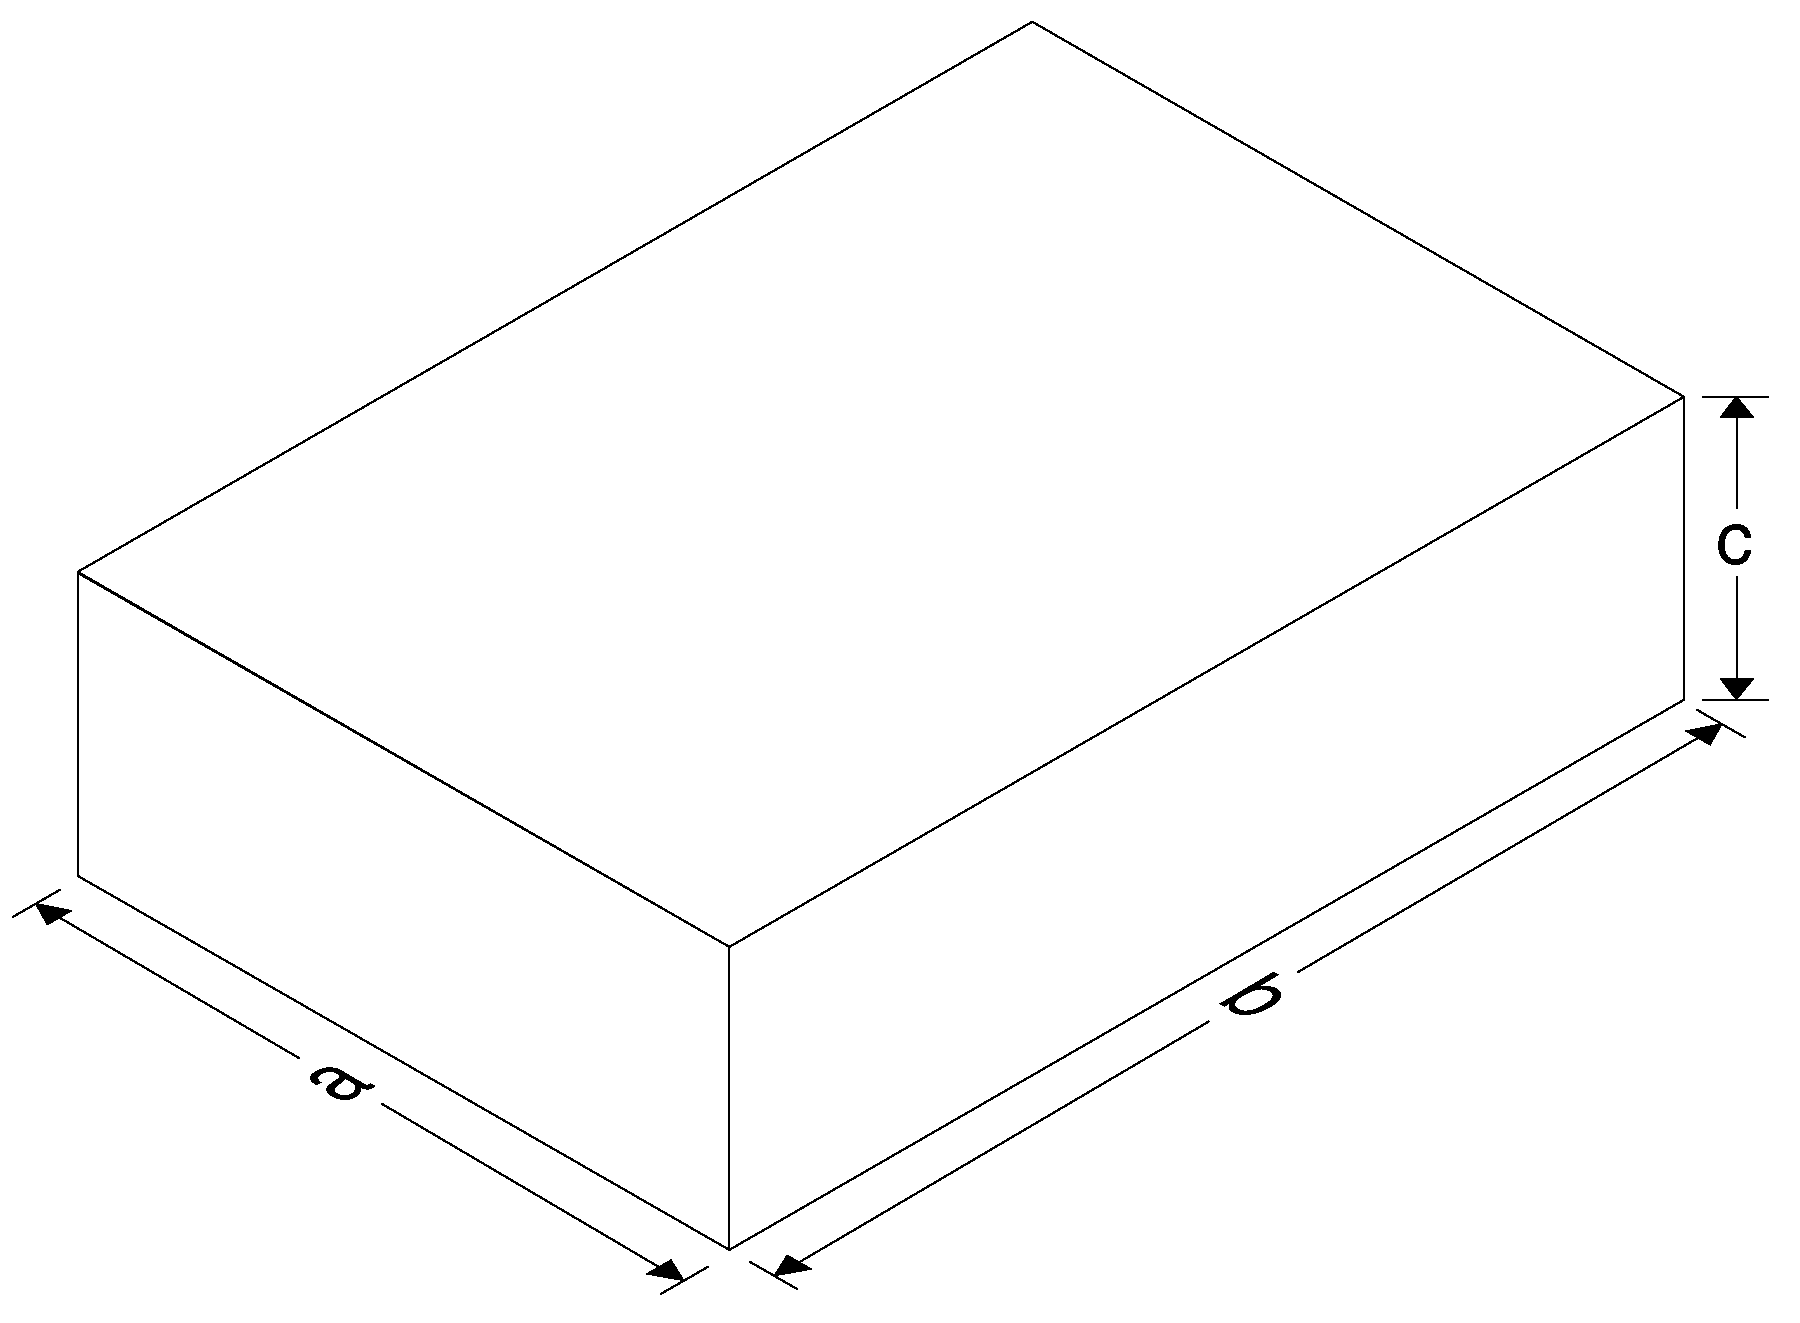 Dimensions for rack form factor